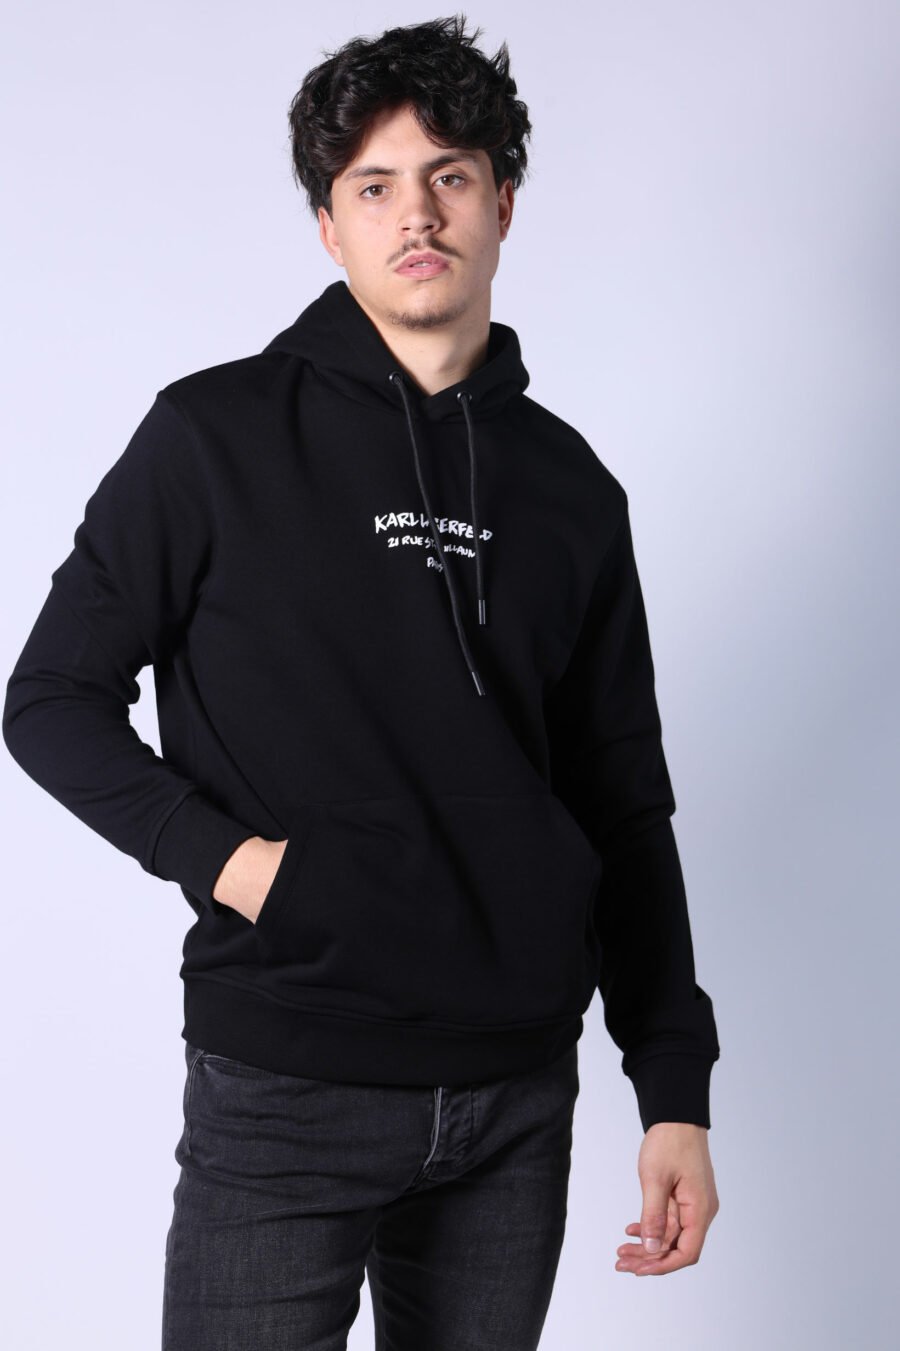 Black hooded sweatshirt with logo "rue st guillaume" - Untitled Catalog 05748